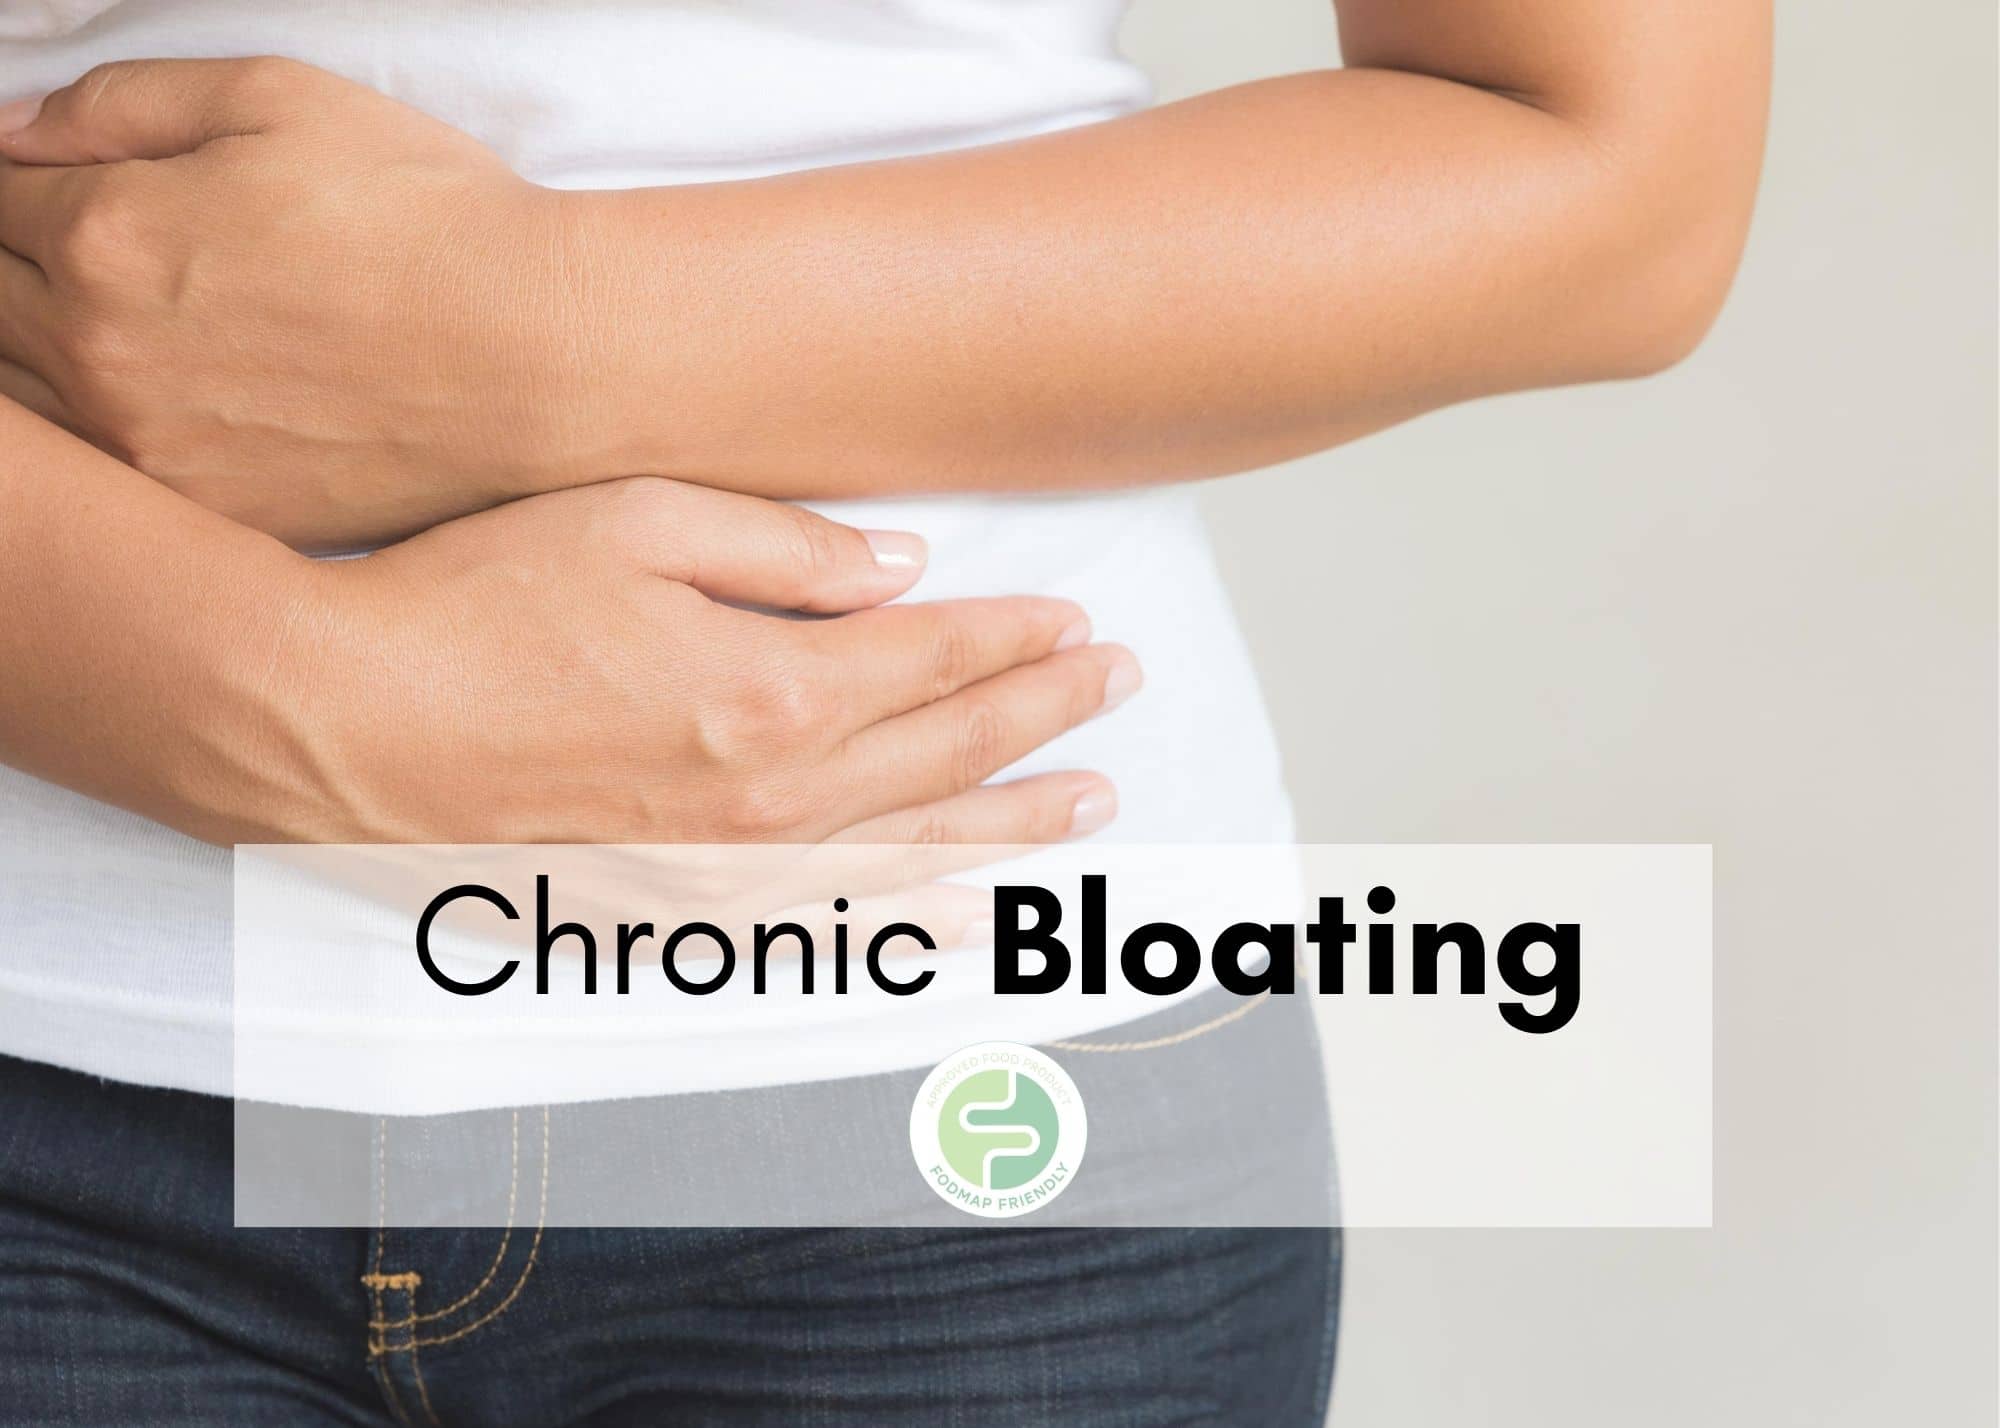 A bad case of the bloat – What is chronic bloating and what can i